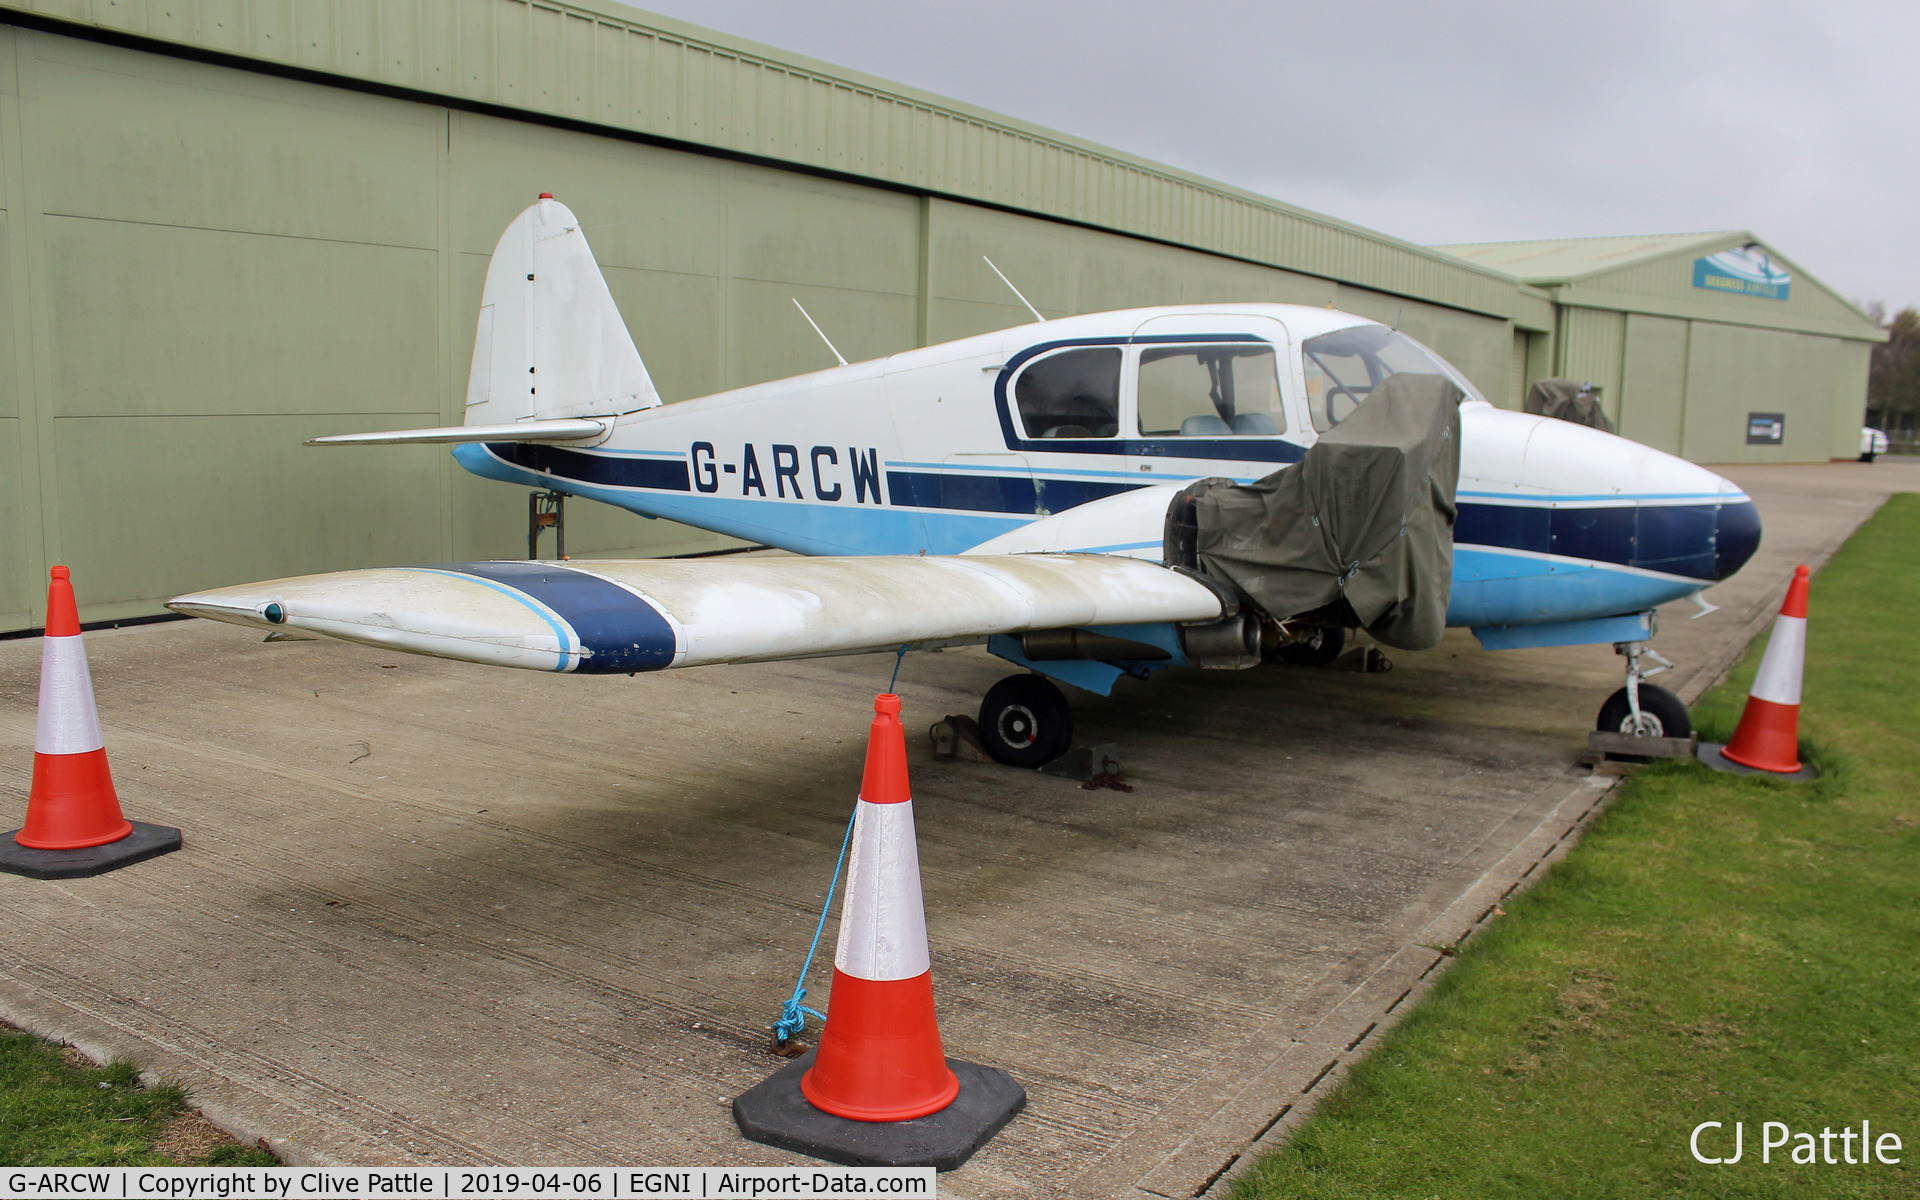 G-ARCW, 1960 Piper PA-23-160 Mod Apache C/N 23-796, Parked at Skegness